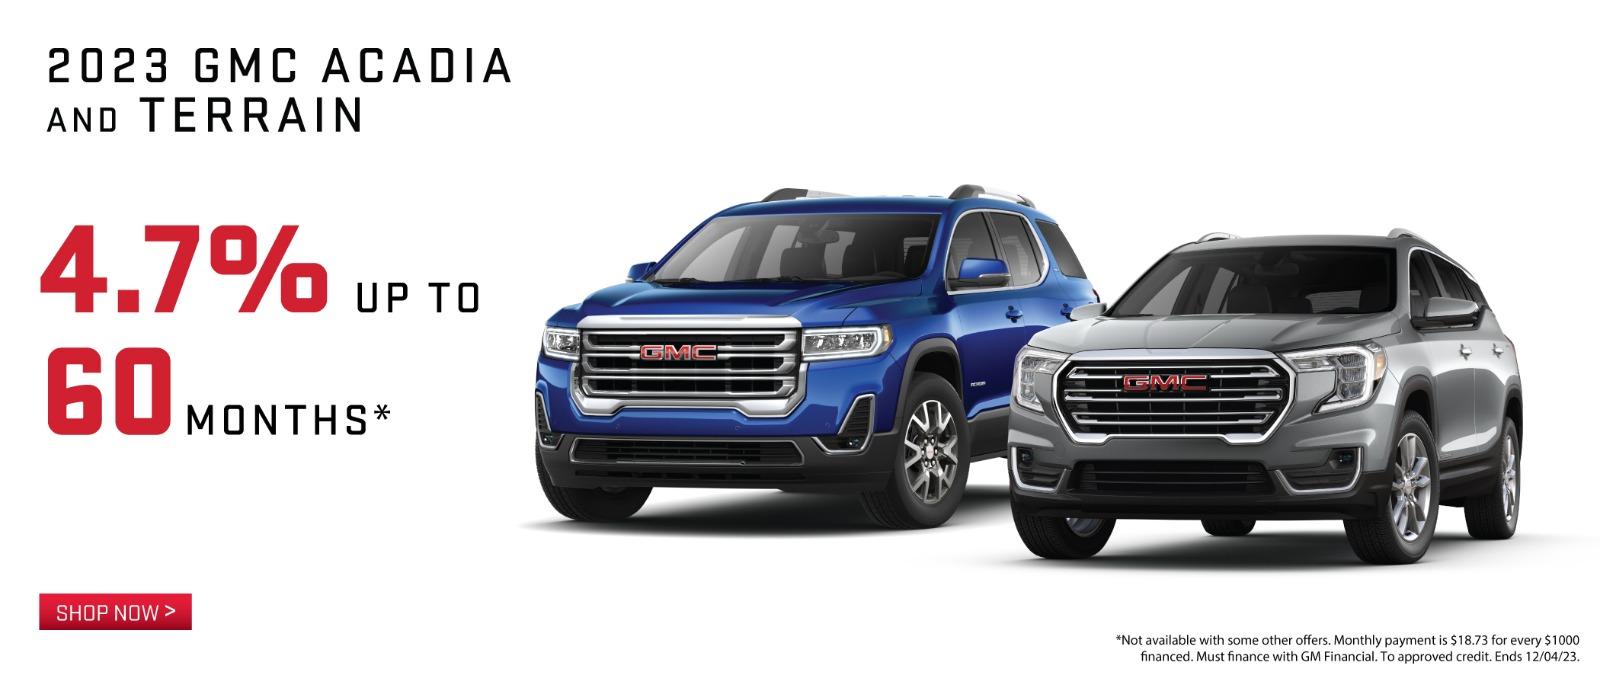 2023 GMC Acadia and Terrain 4.7% up to 60 months